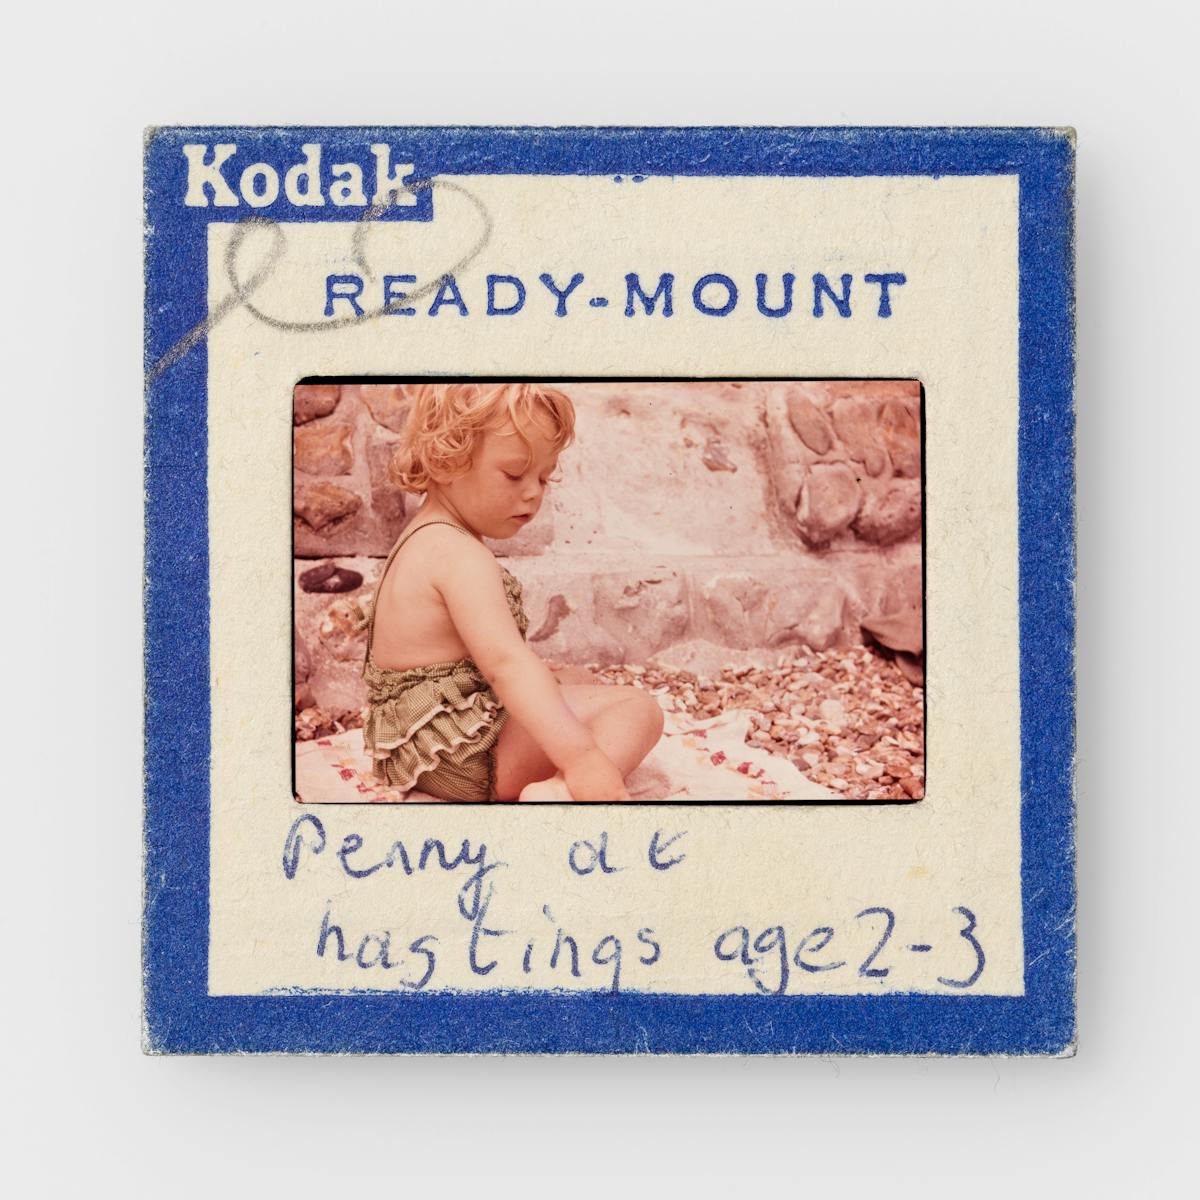 Photograph of a colour 35mm transparency mounted in a cardboard side holder, resting on a white background. The transparency shows a young girl in a frilly green bathing suit sitting on a towel on a shingle beach, by a stone wall. The slide mount has a blue border around the edge with Kodak Ready-mount printed on it. A hand written note on the mount reads, "Penny at Hastings age 2-3".